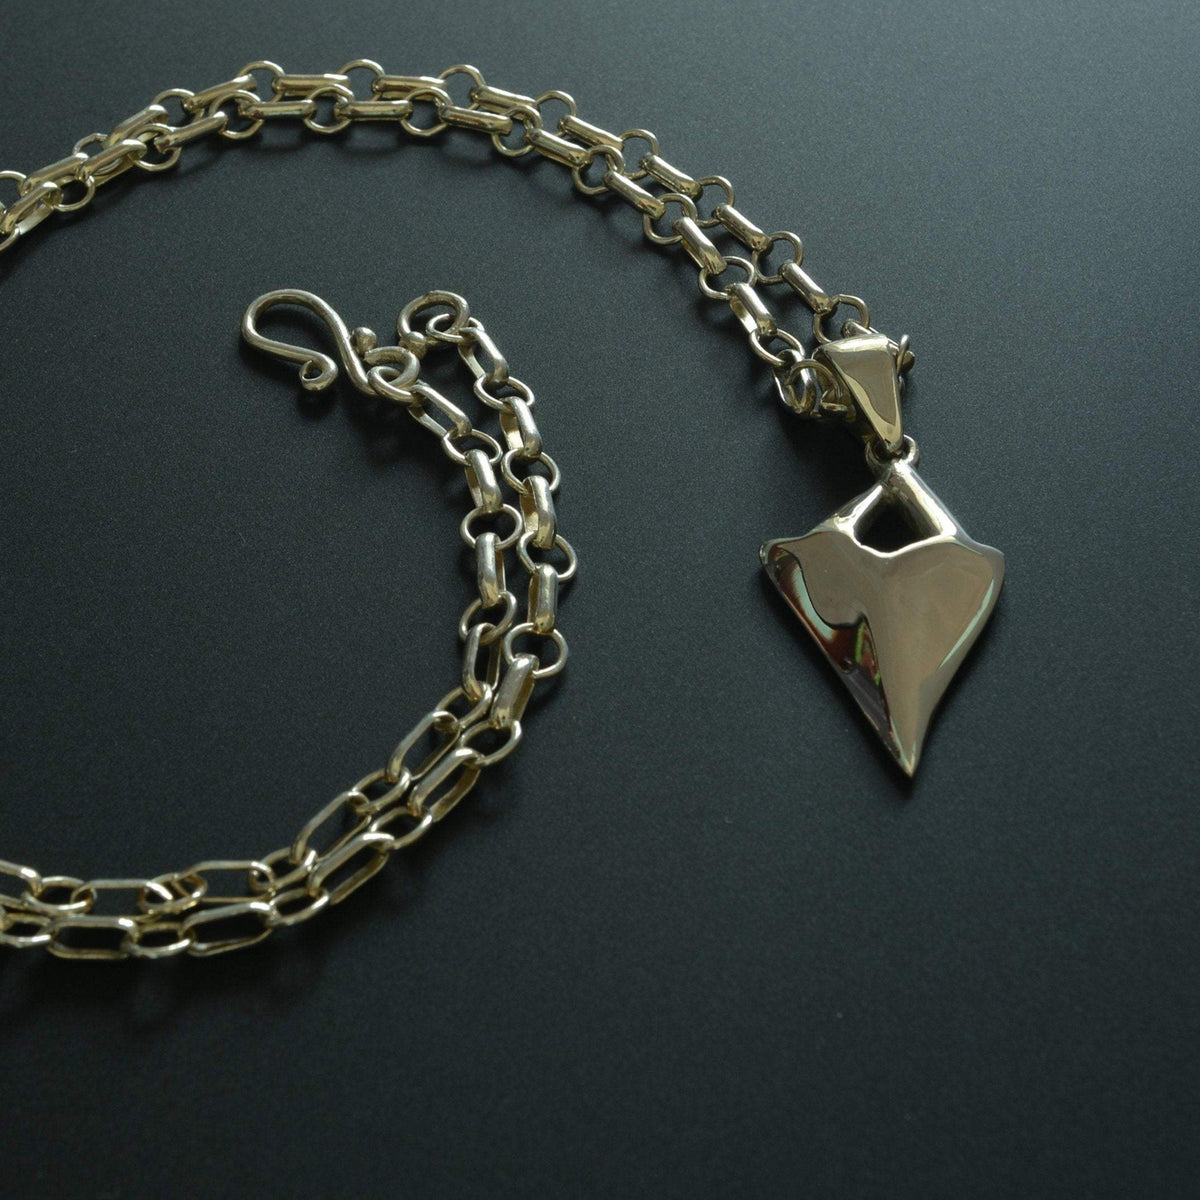 Shark tooth sterling silver chain and pendant